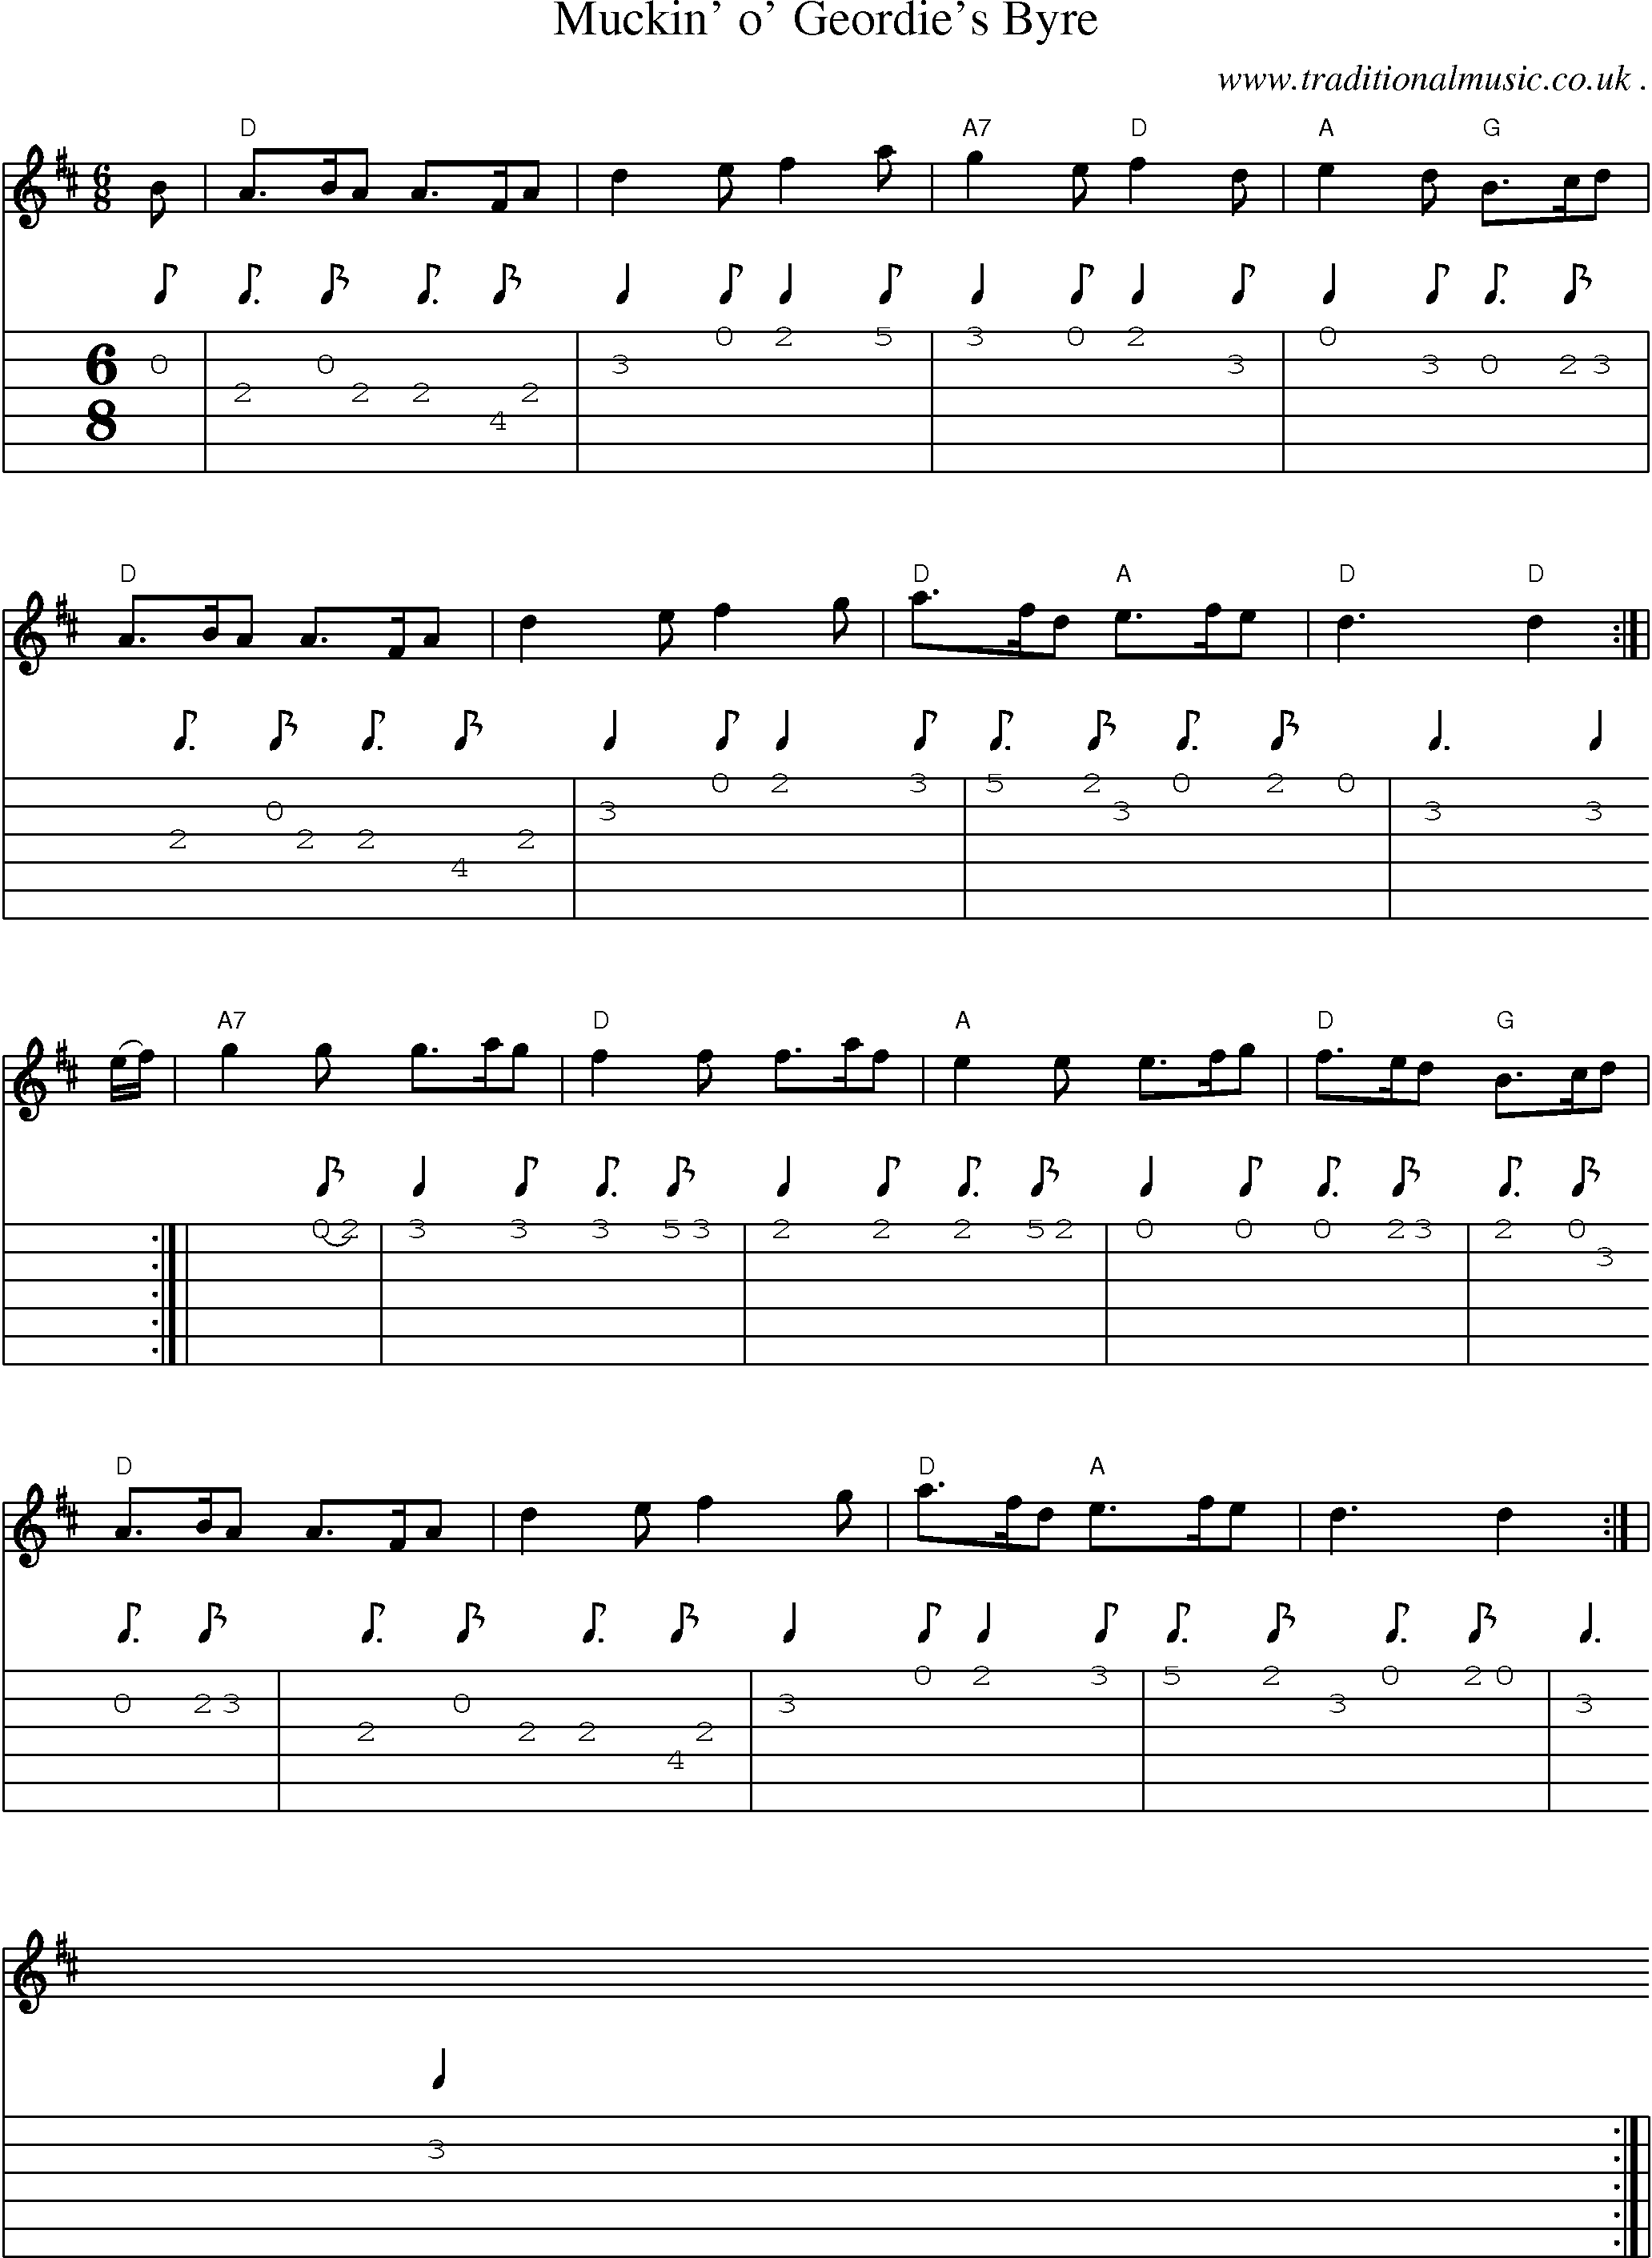 Sheet-music  score, Chords and Guitar Tabs for Muckin O Geordies Byre